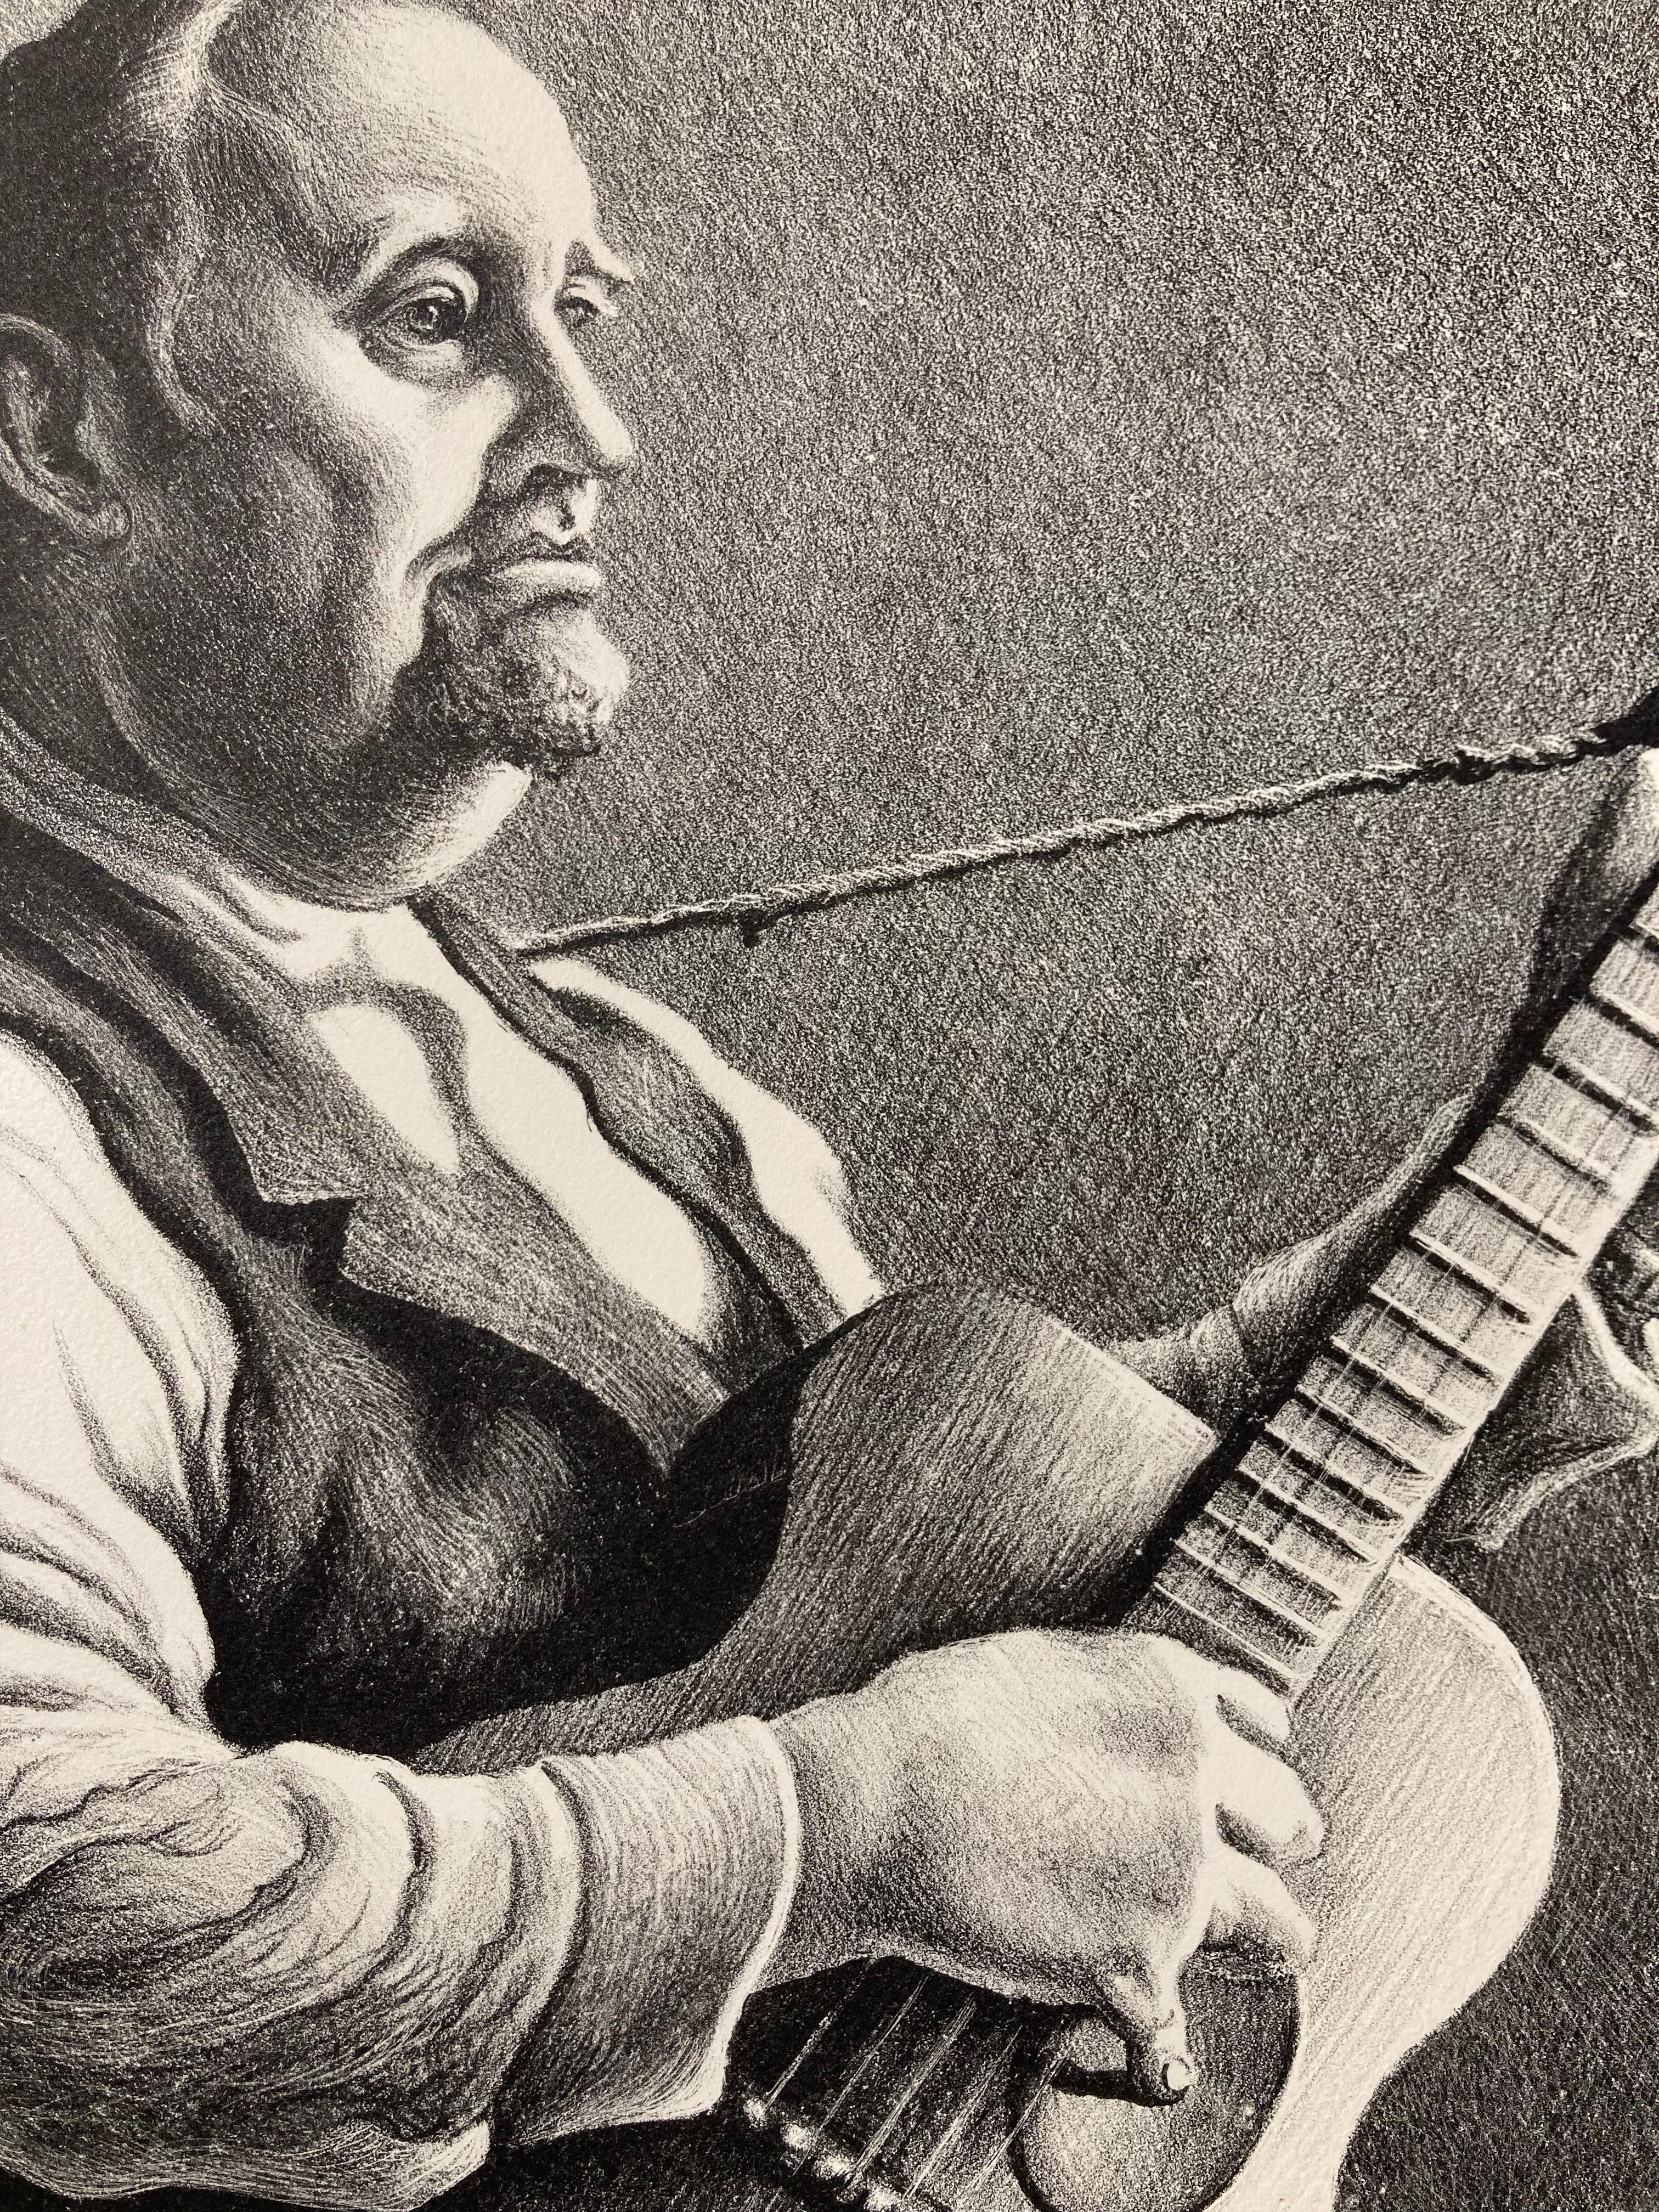 THOMAS HART BENTON (1890- 1975)

HYMN SINGER / THE MINSTREL (Portrait of Burl Ives) 1950 (Fath 74)
Lithograph signed with full signature “Thomas H. Benton” A large image, 15 ¾ x 12 inches 
on a full sheet, 19 ¾ x 15 ¾ inches with deckle edges.